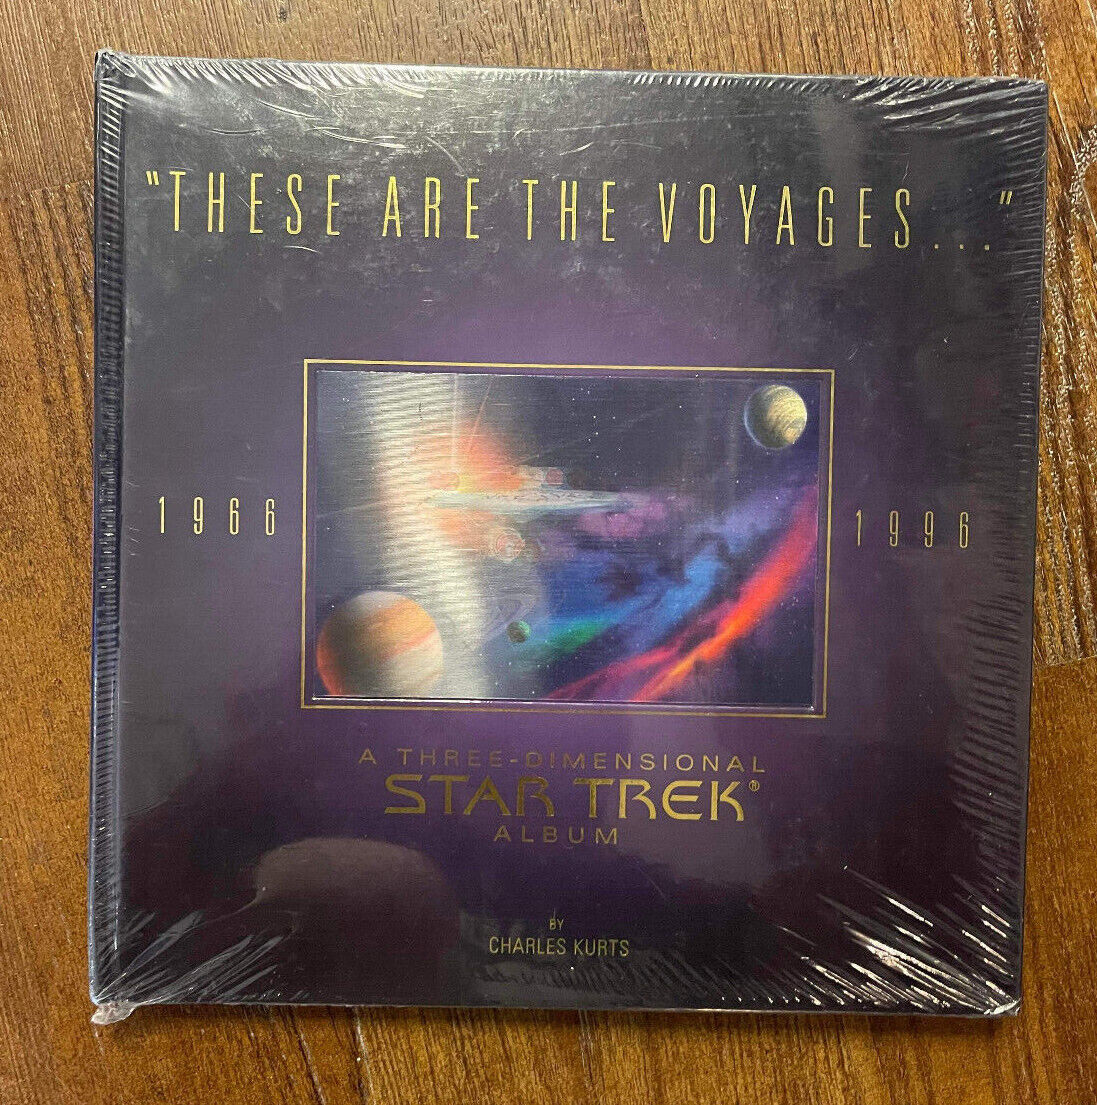 STAR TREK ALBUM These Are the Voyages 1966 - 1996 3 Dimensional Pop-Up Book